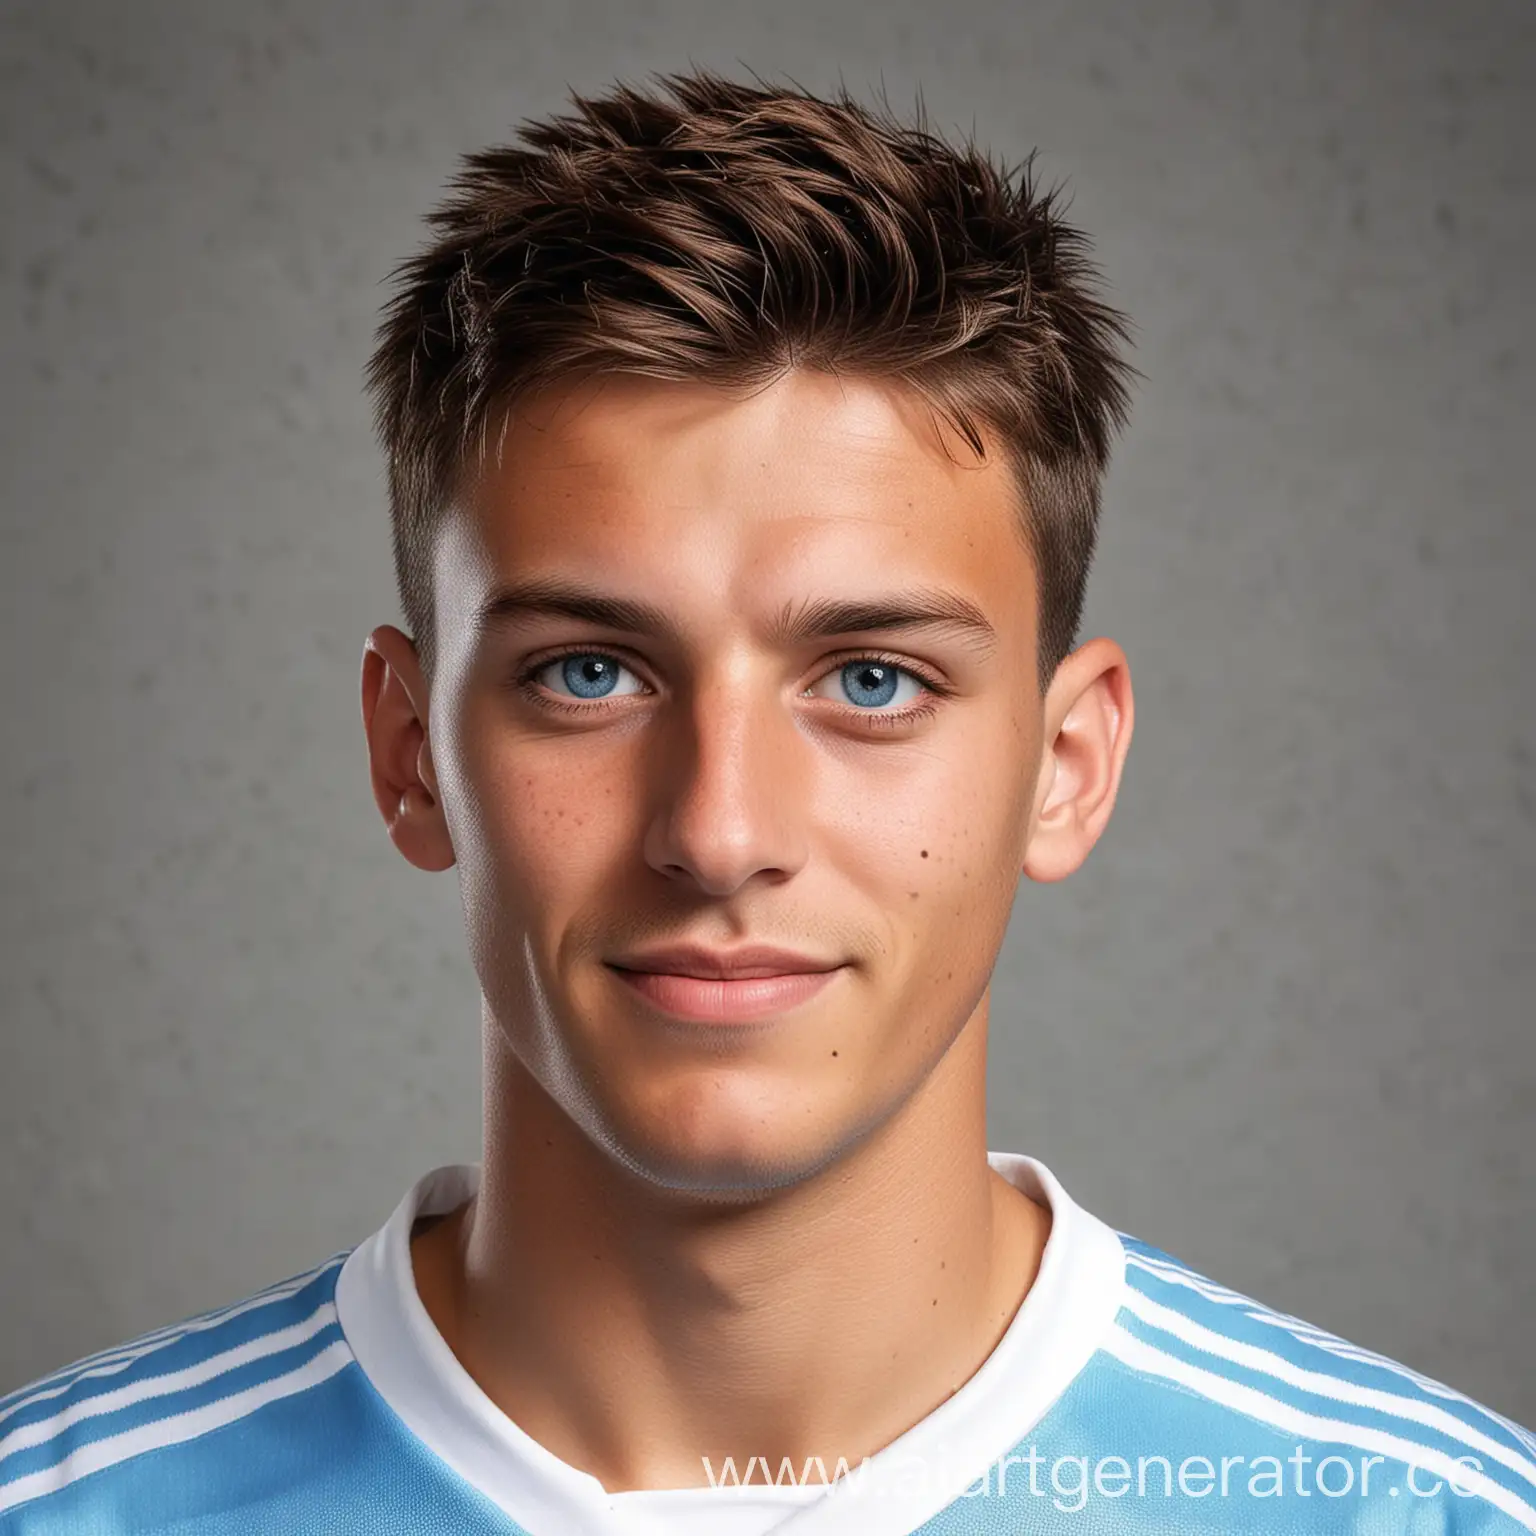 Young-Argentine-Footballer-in-WhiteBlue-Uniform-Smiling-for-Passport-Photo